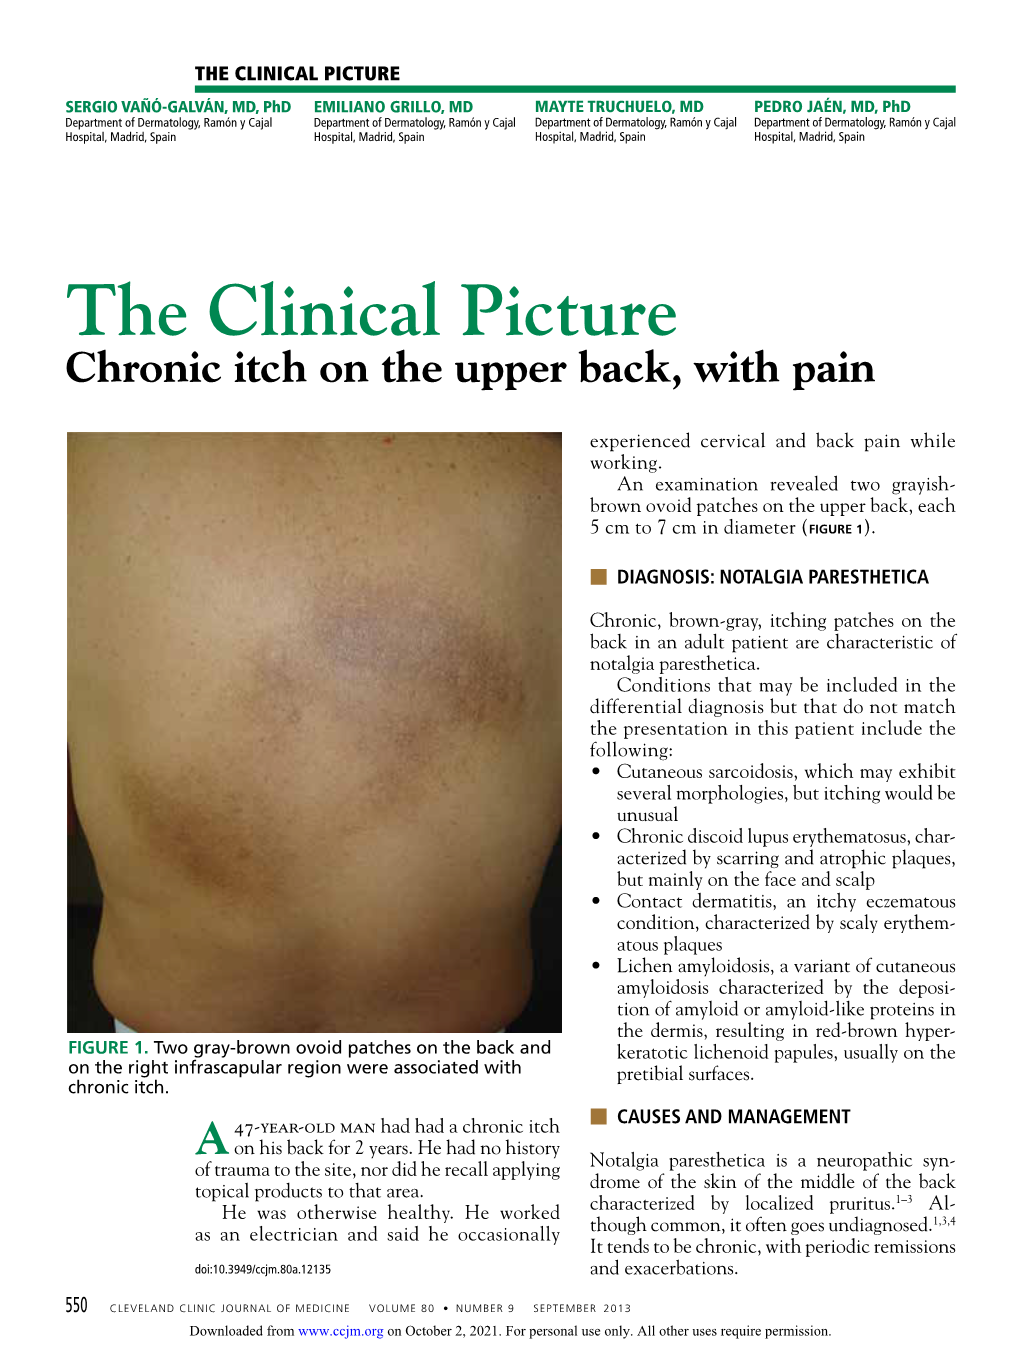 Chronic Itch on the Upper Back, with Pain